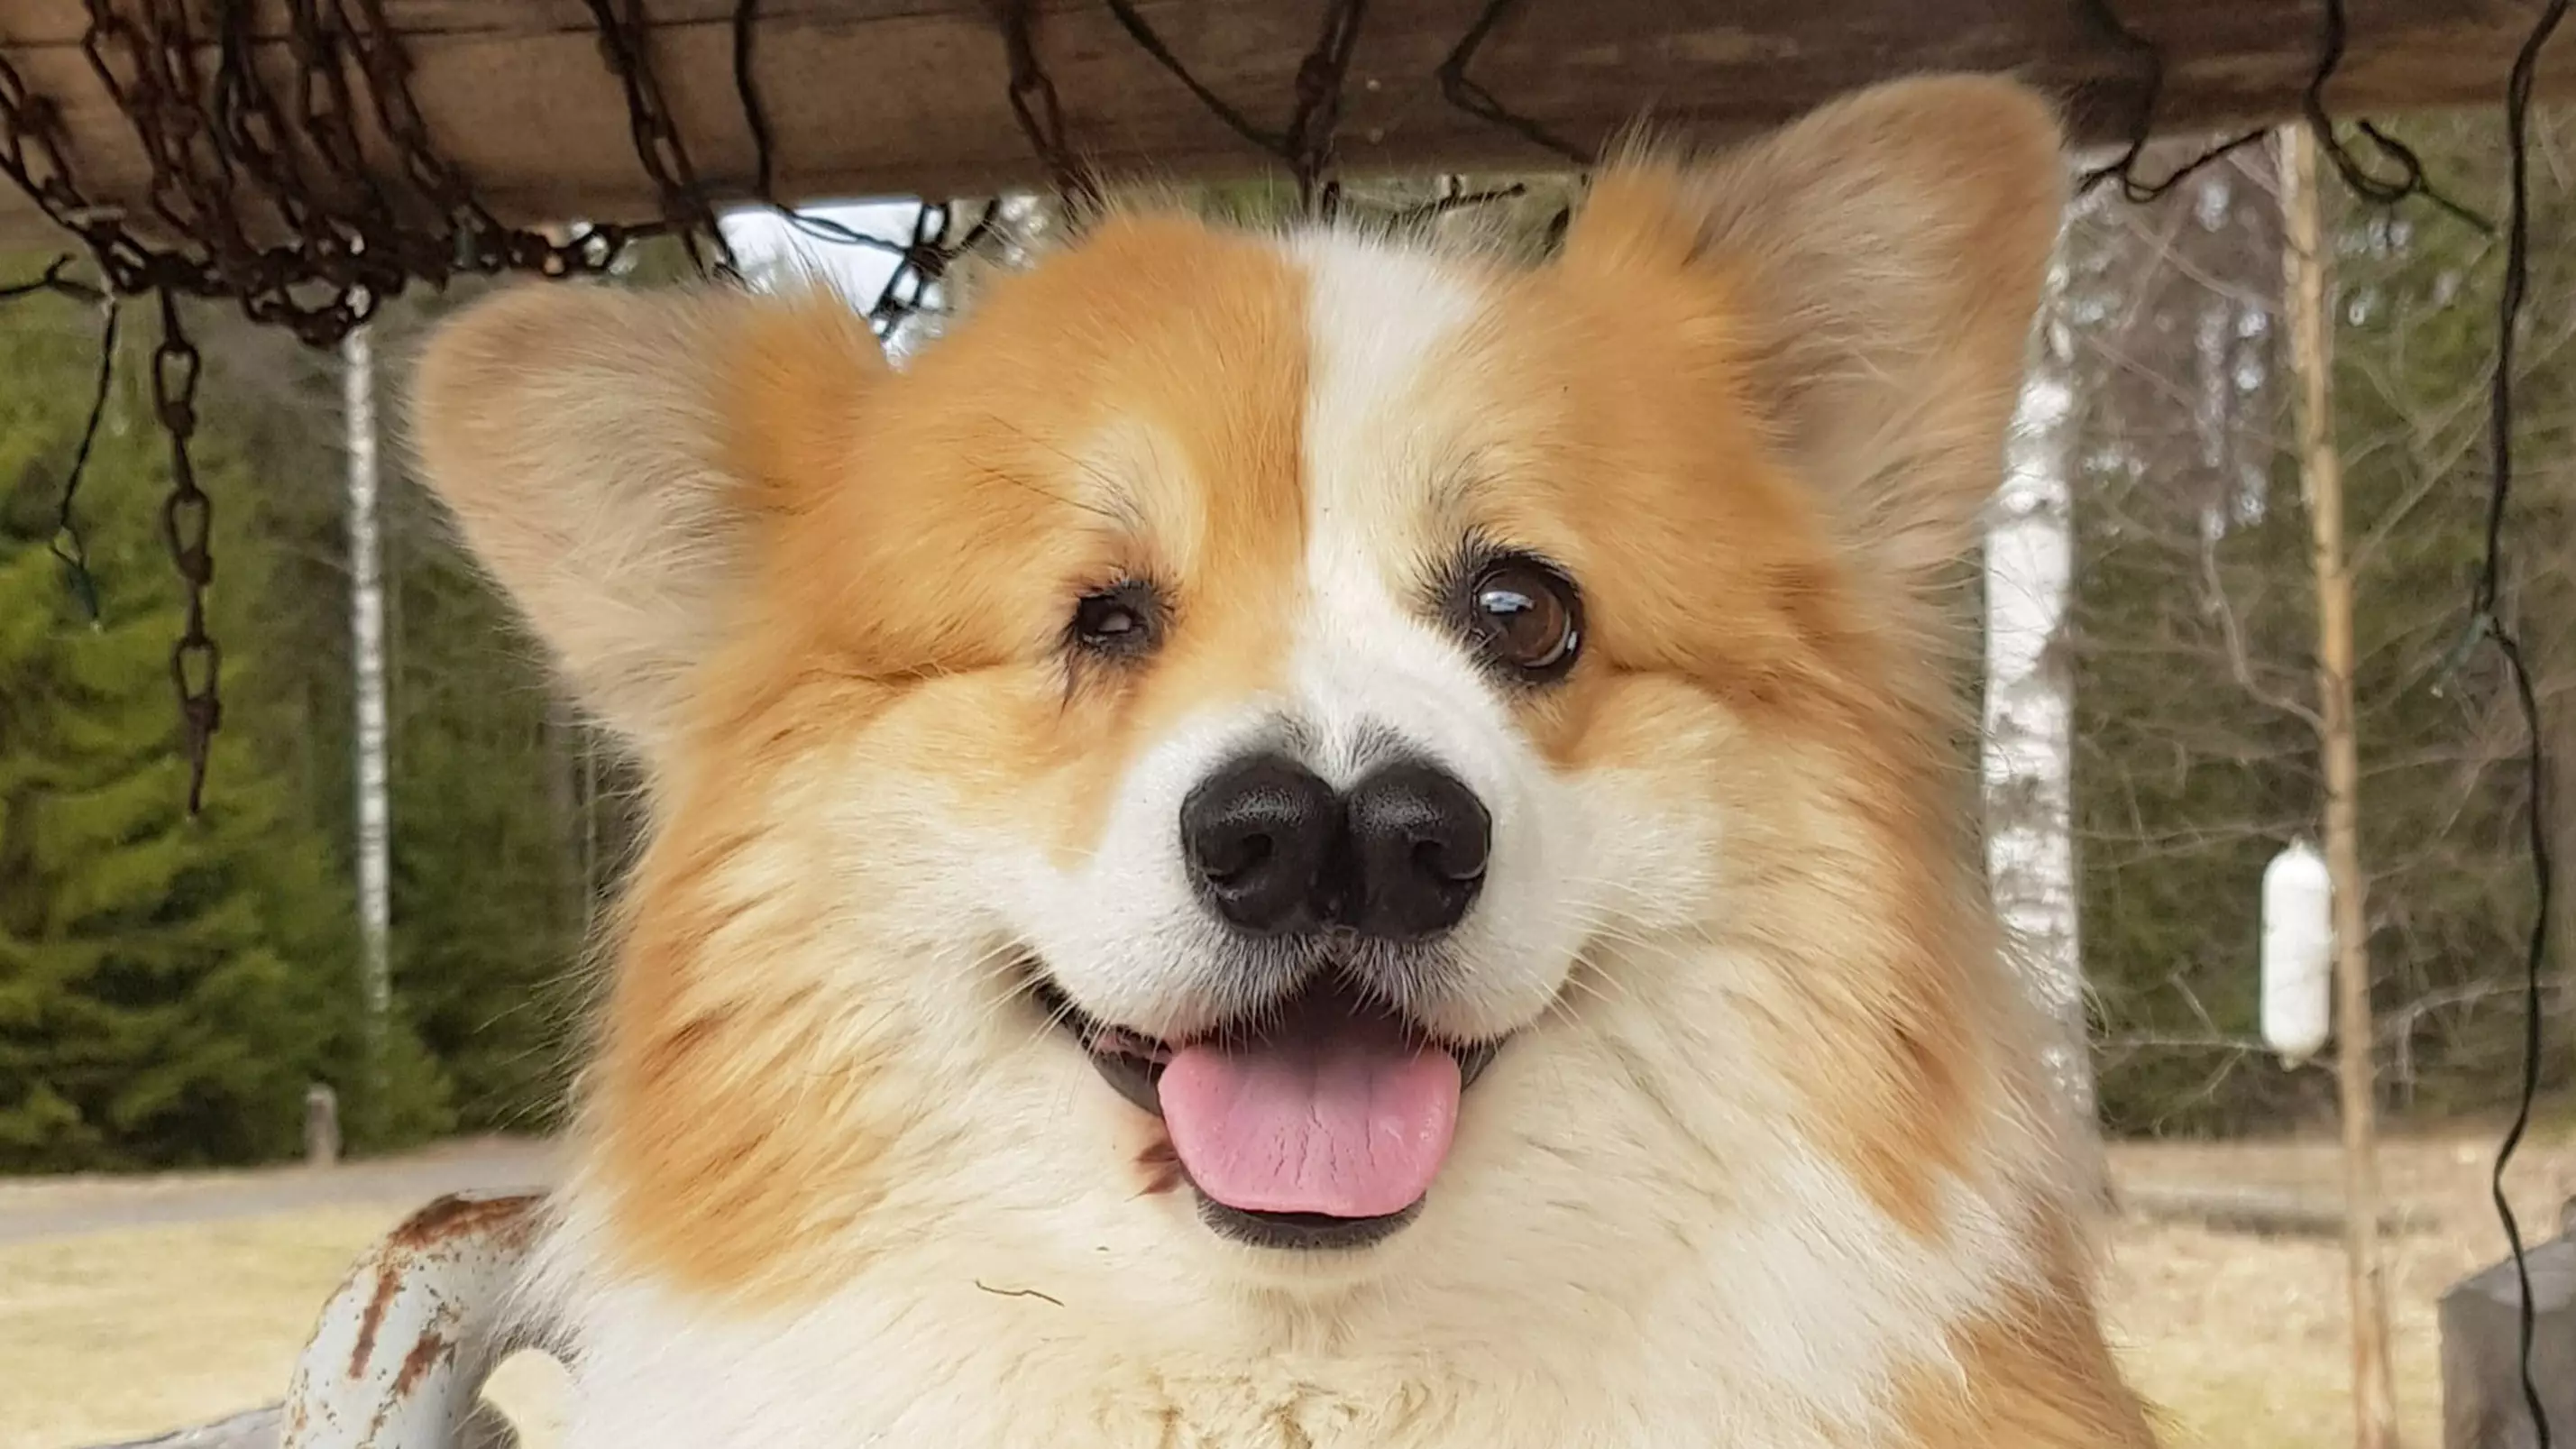 Corgi Born With One Eye And Two Noses Is Living Its Best Life Defying The Odds